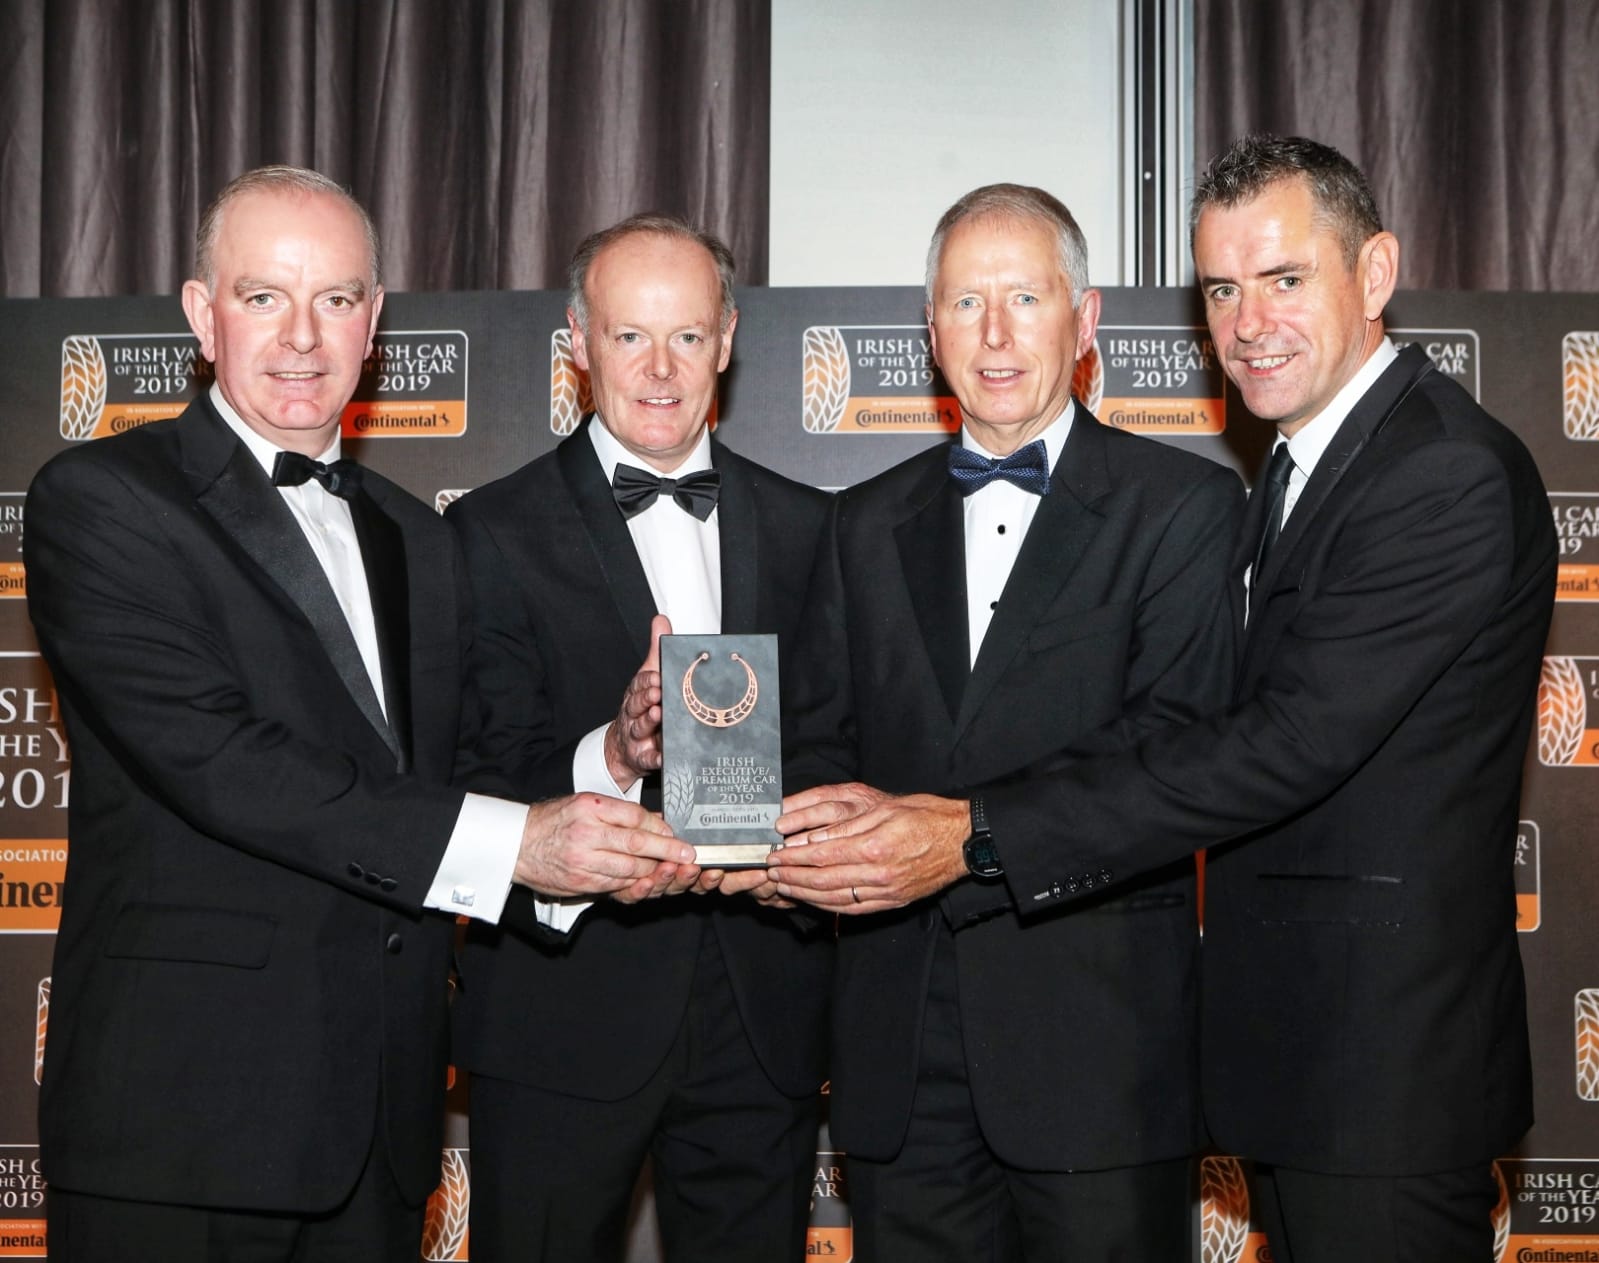 Mercedes Benz CLS is Irish Executive / Premium Car of the Year